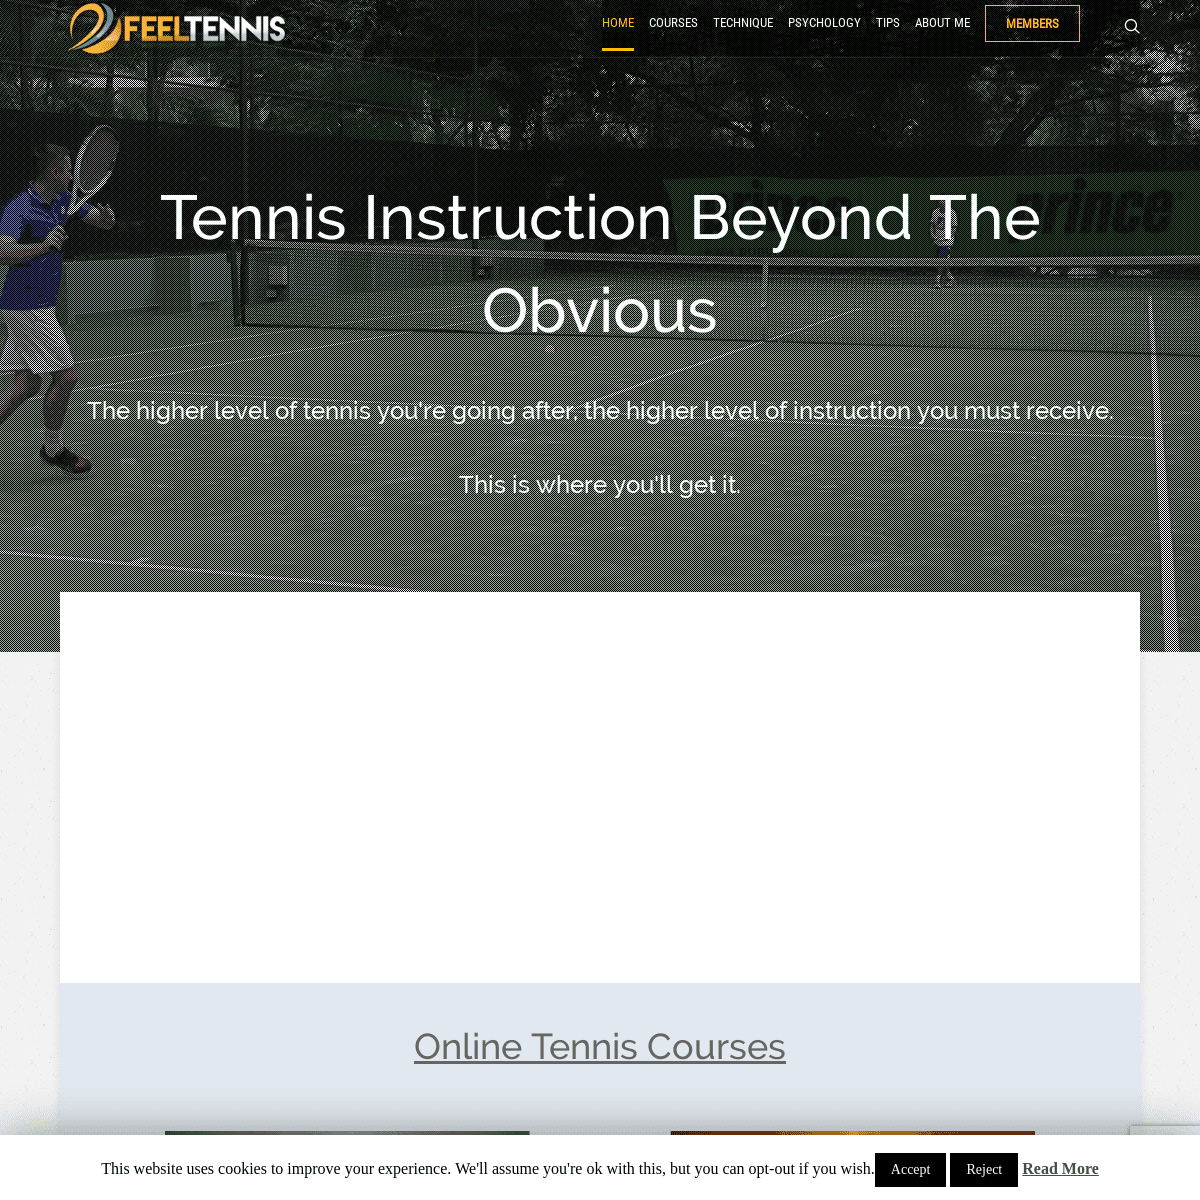 A complete backup of feeltennis.net